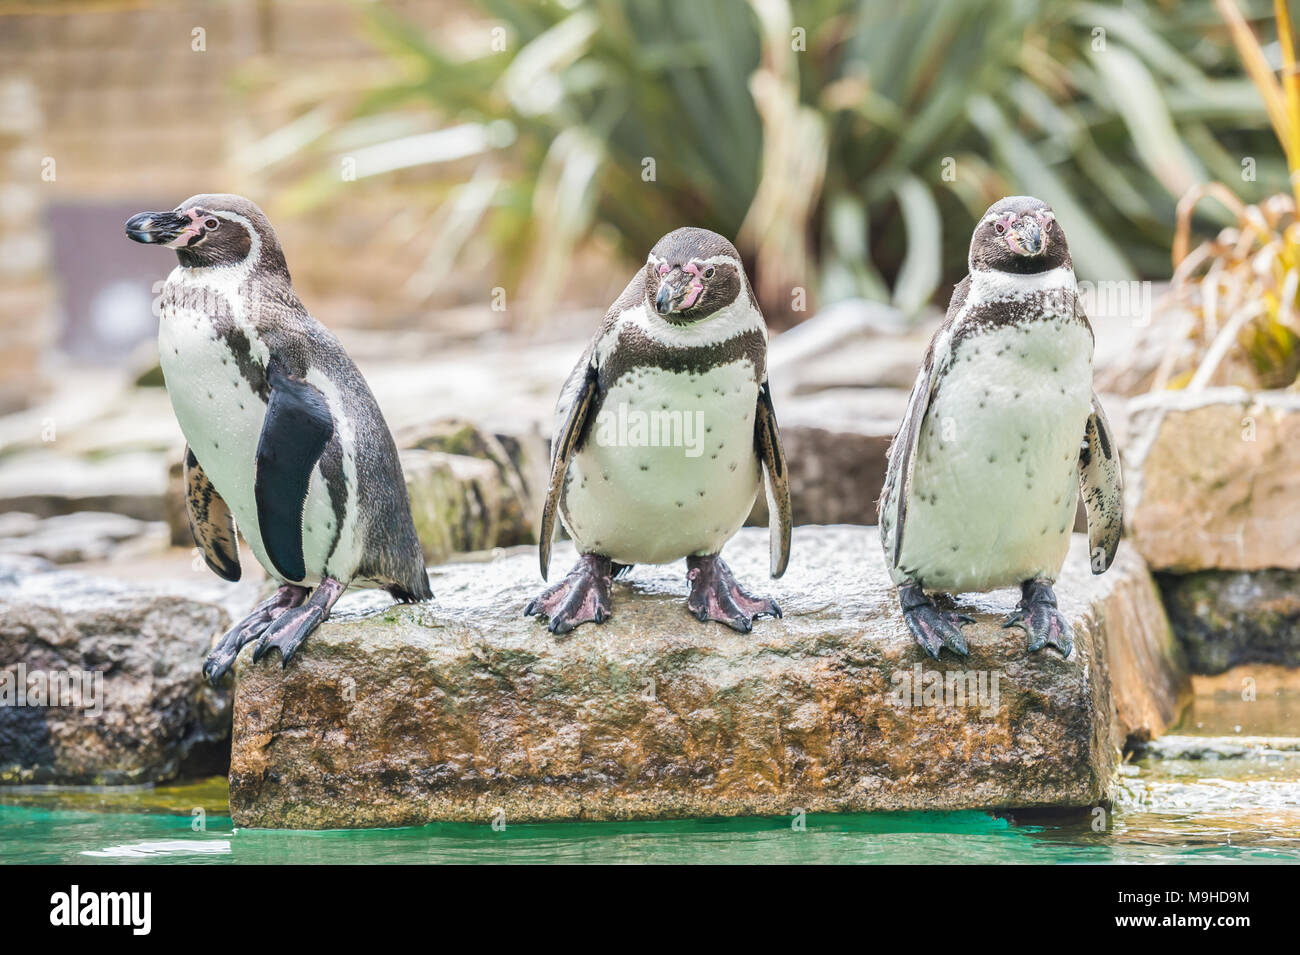 Three Humboldt penguins in a rocky zoological enclosure Stock Photo